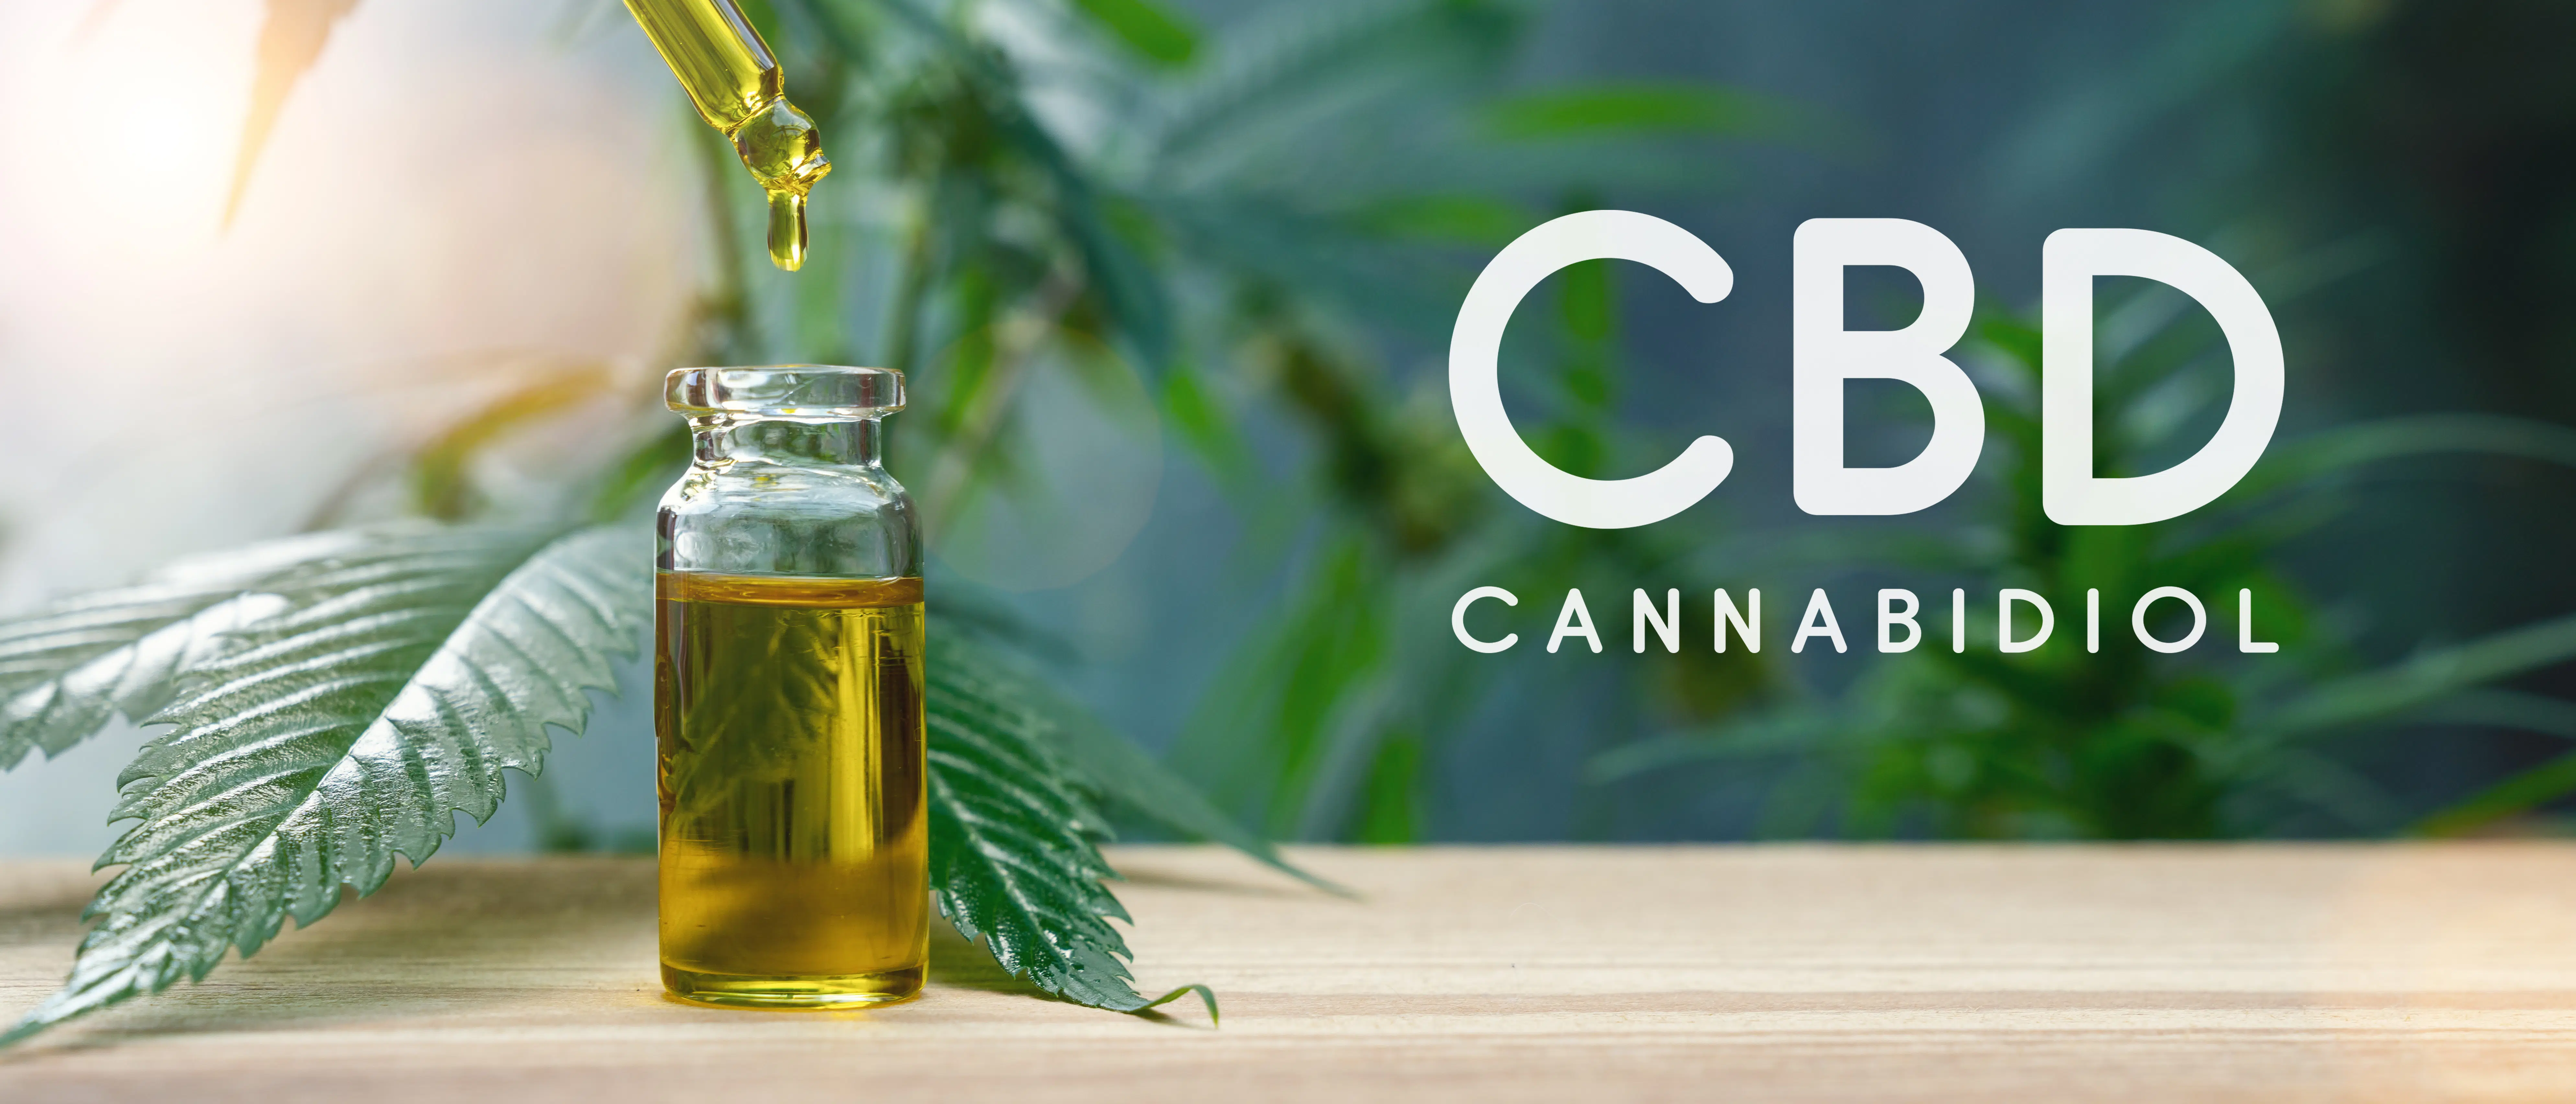 CBD Oil in Brantford | Tonik Cannabis Looking for premium CBD oil along the Brantford area? Check out the variety of CBD oils and other vape products at Tonik Cannabis for that wonderful CBD experience you deserve!